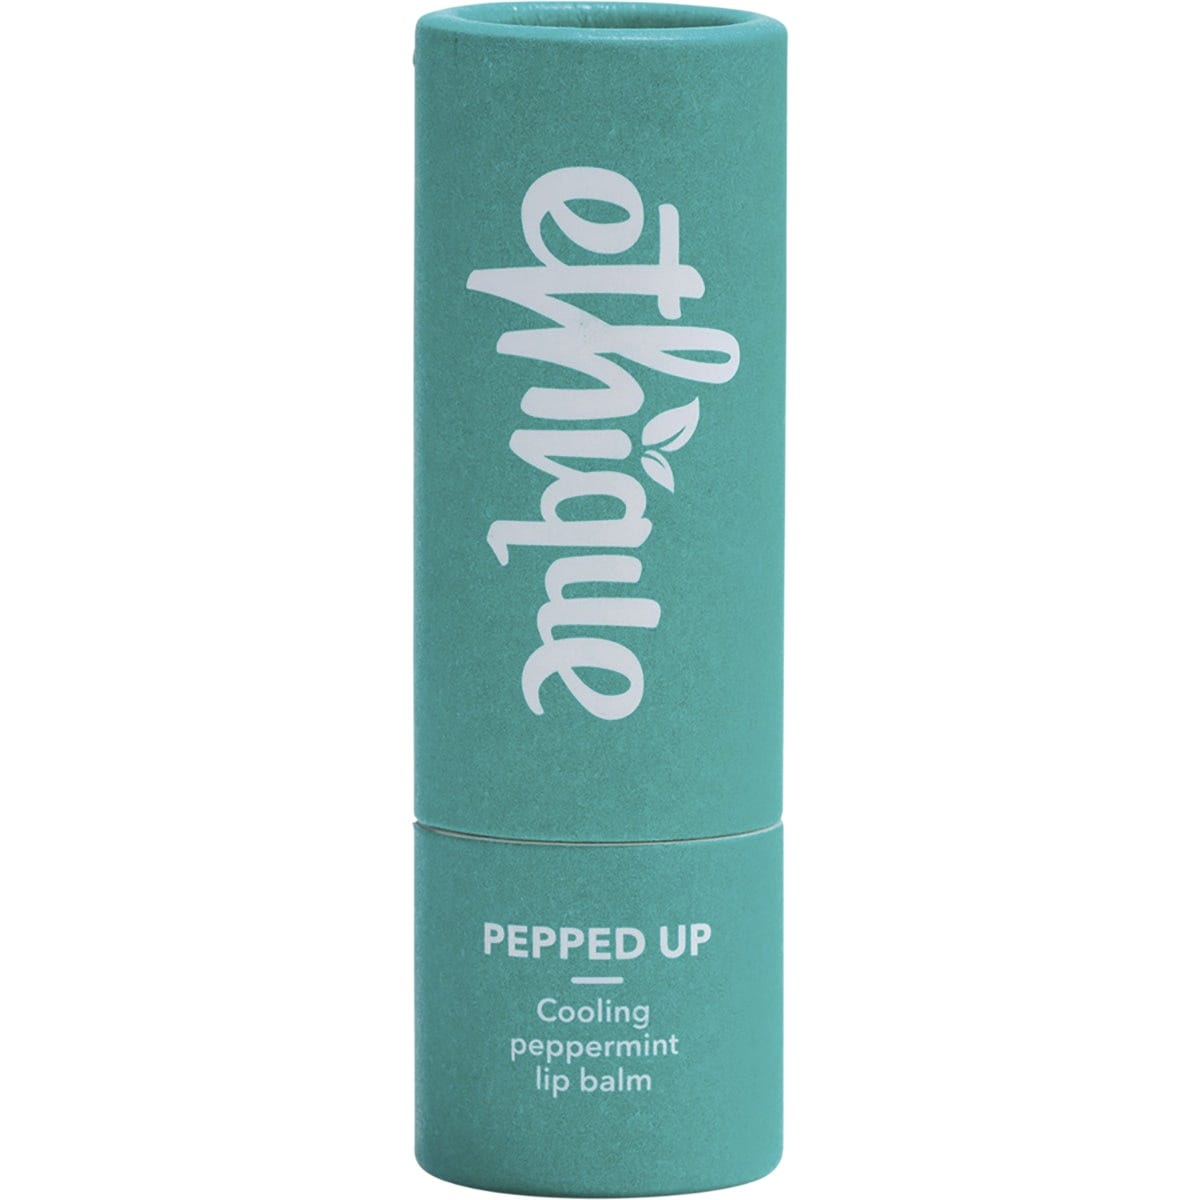 Ethique Lip Balm Pepped Up Peppermint